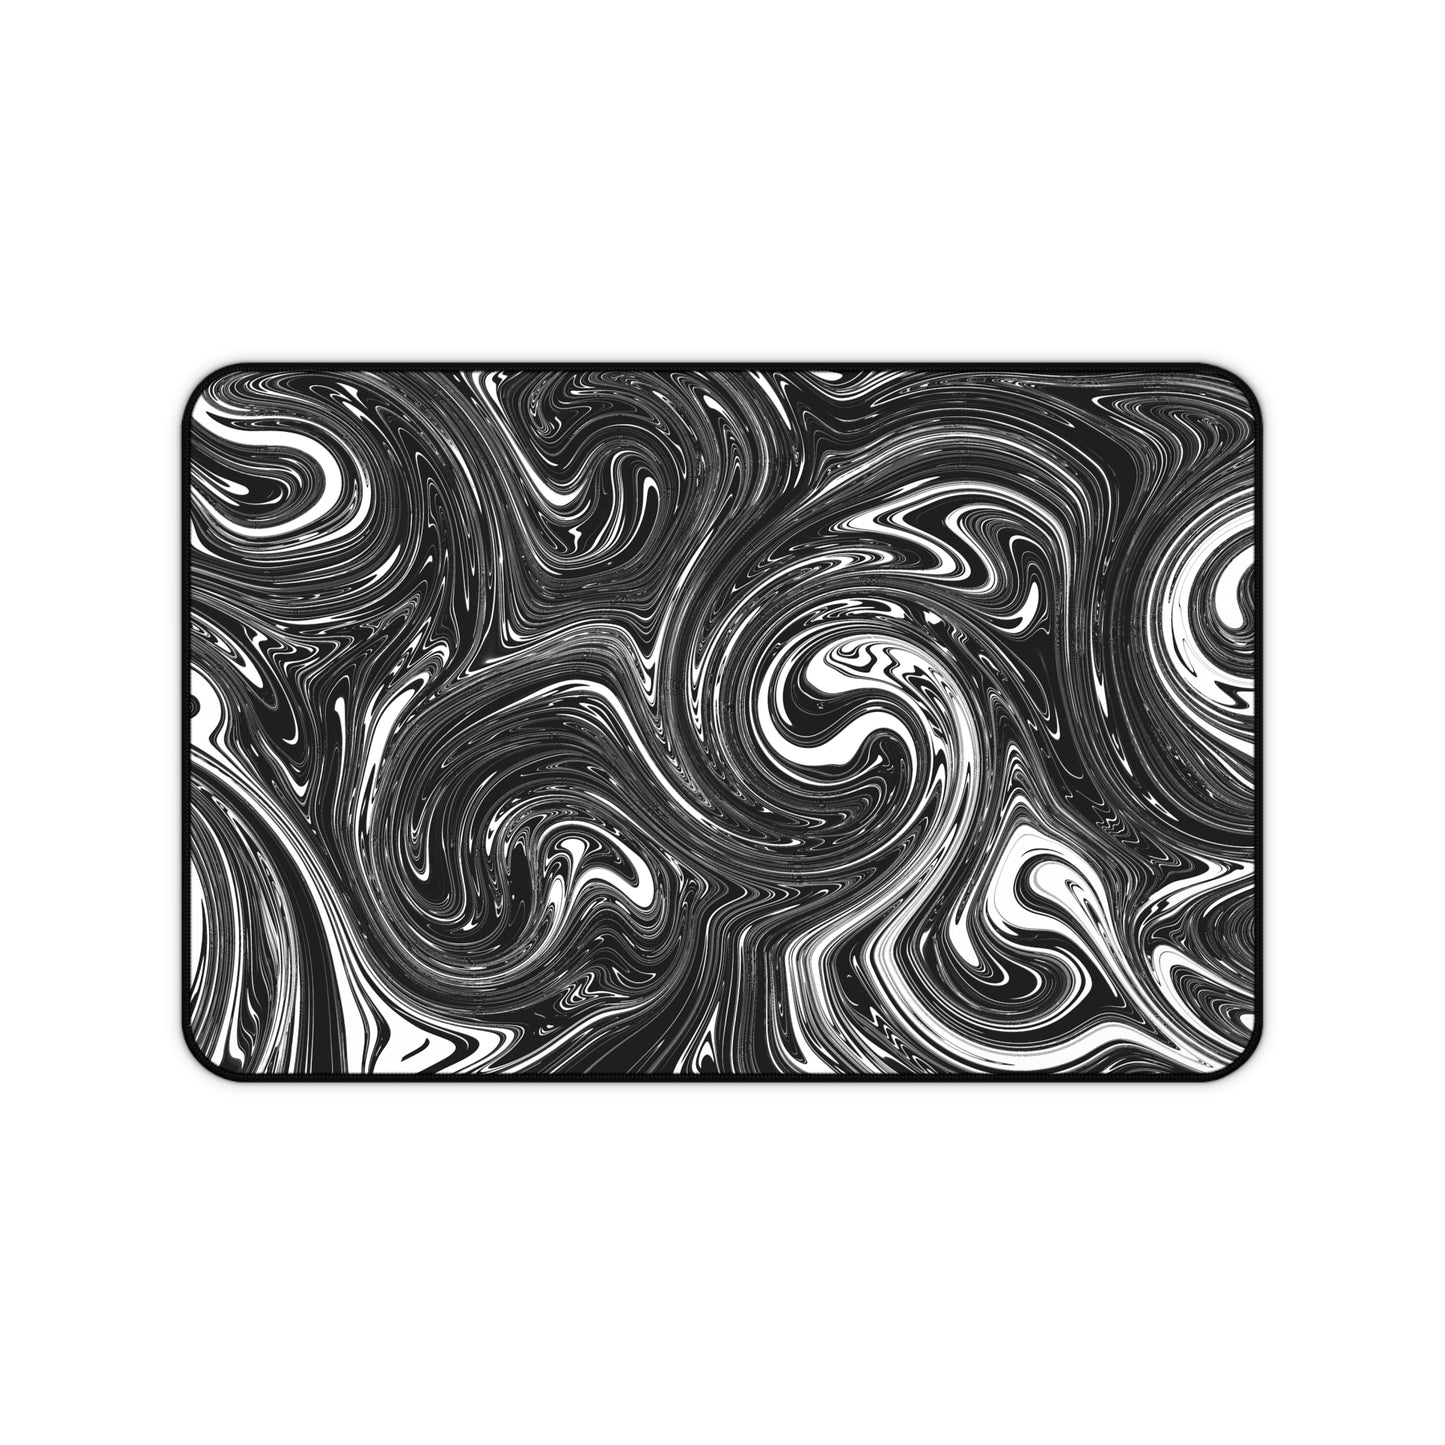 A 12" x 18" desk mat with black and white swirls.